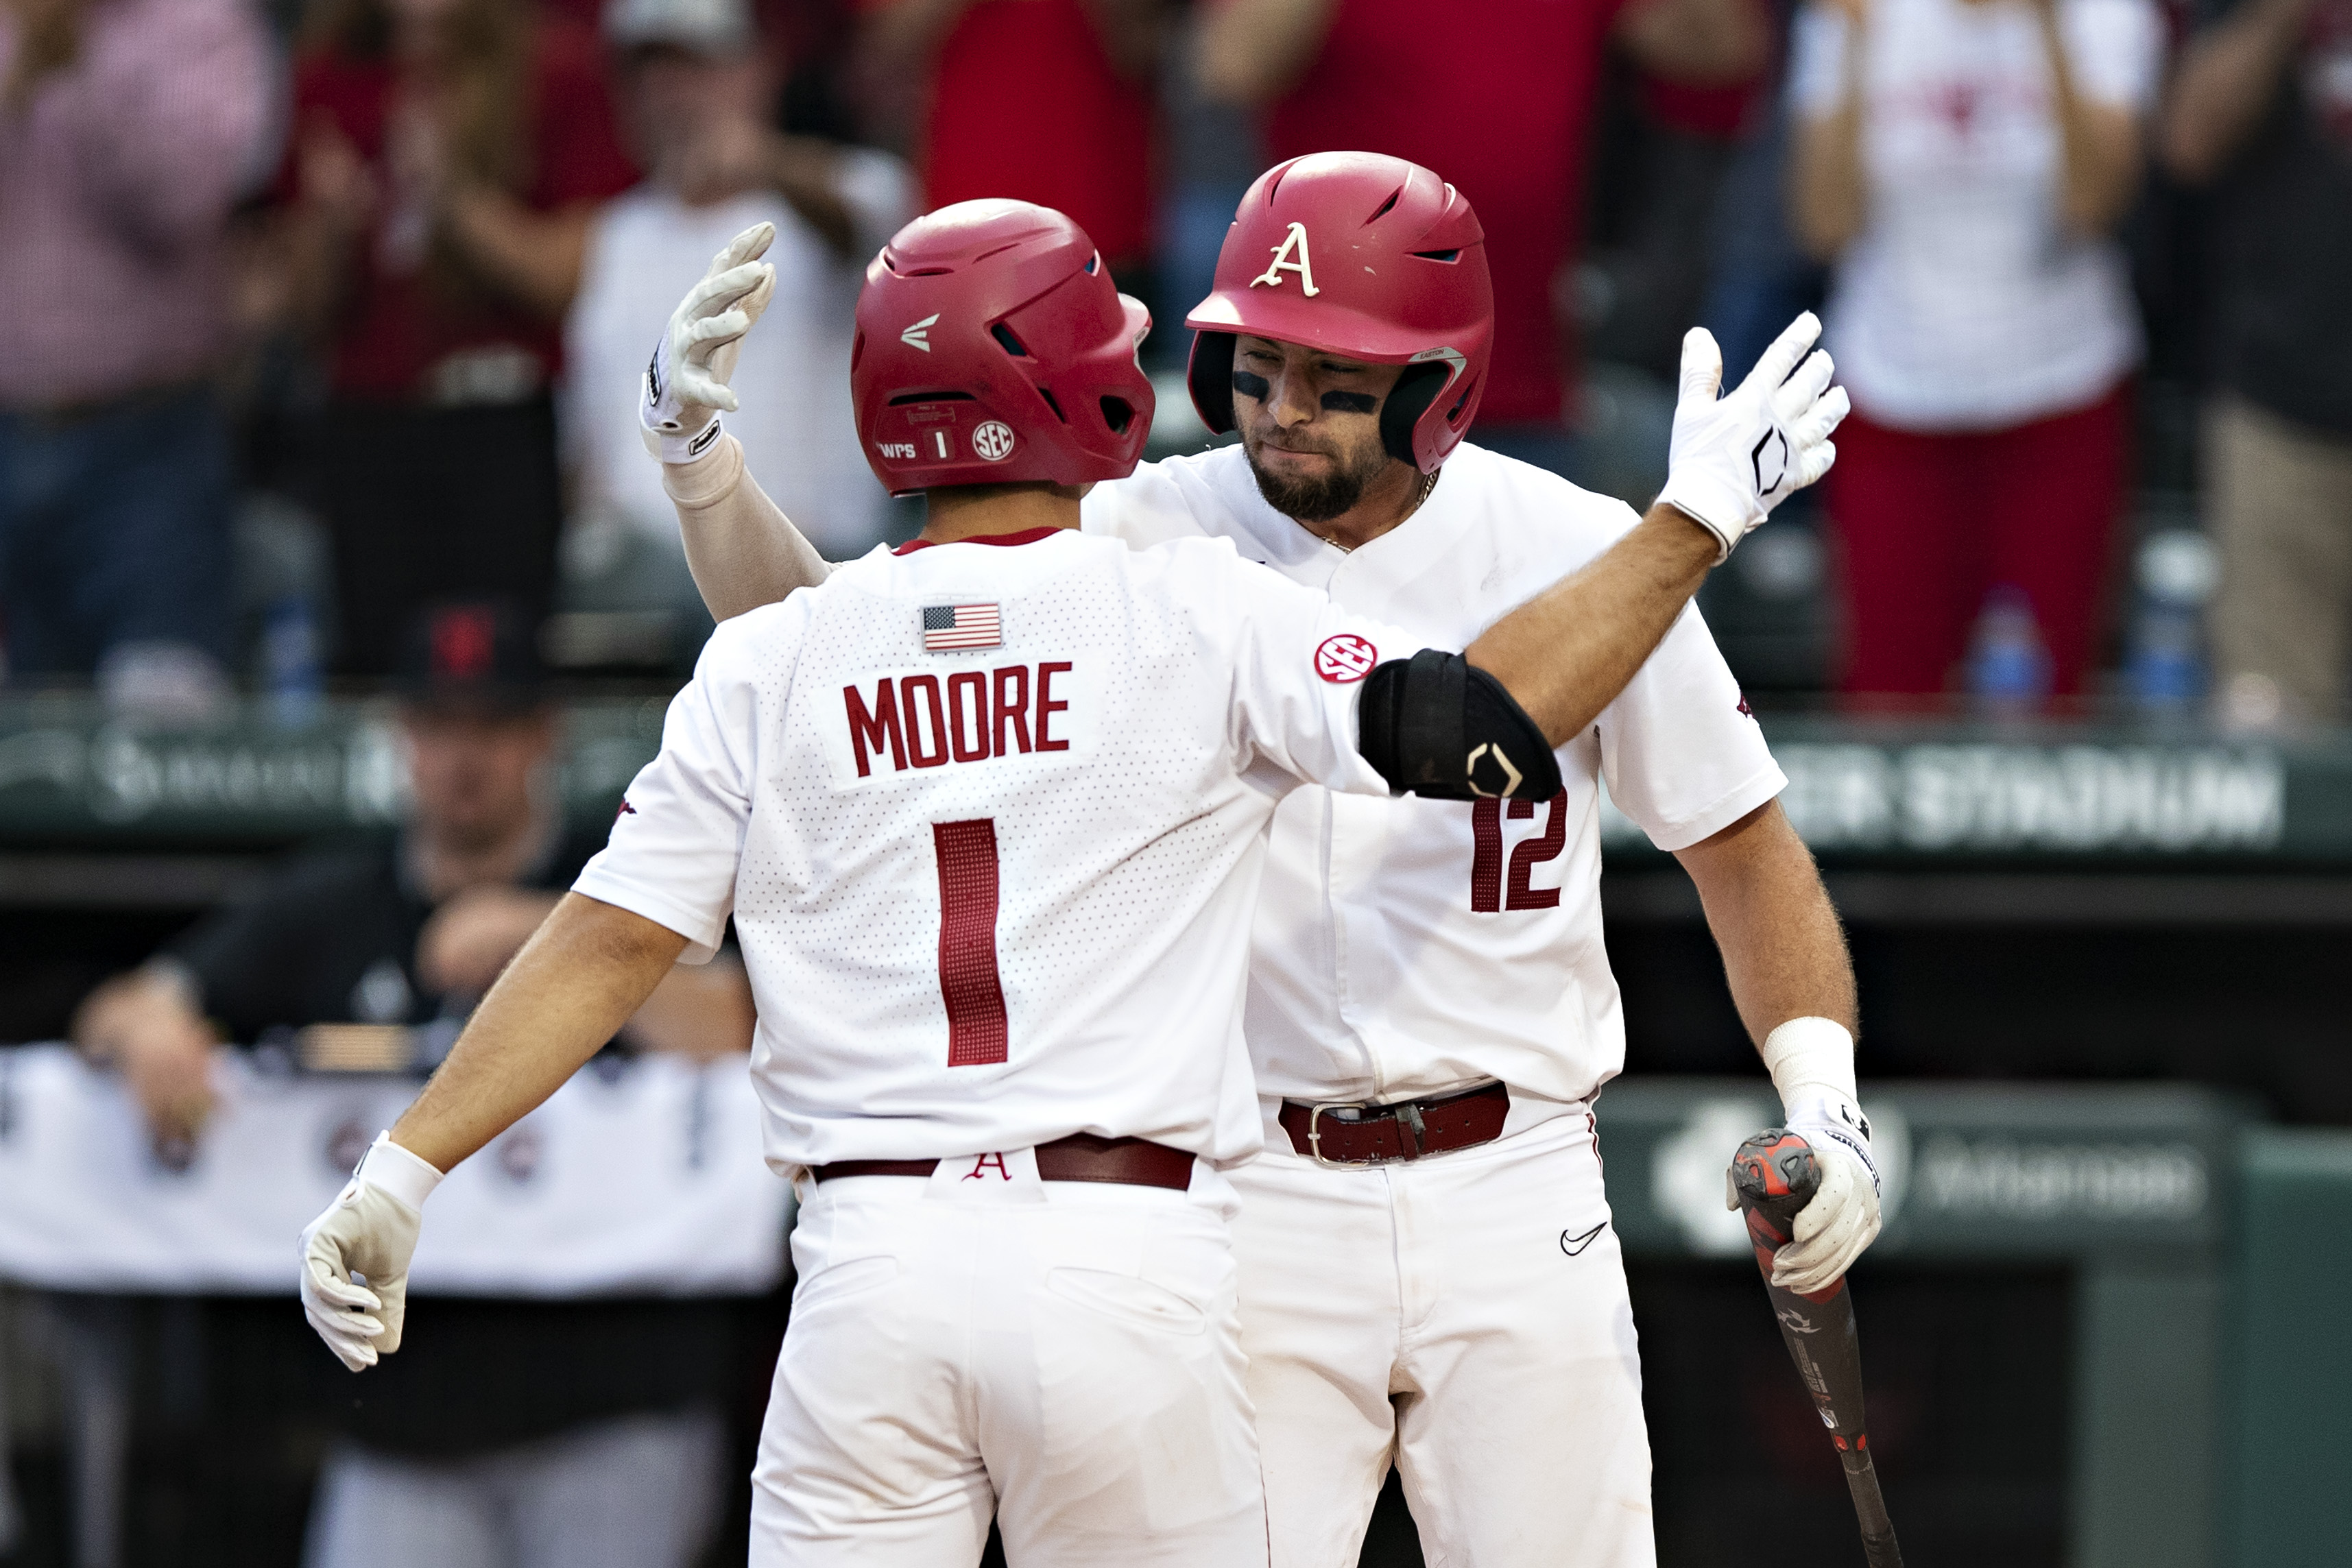 35+ Big 12 Baseball Tournament 2021 Results Pictures